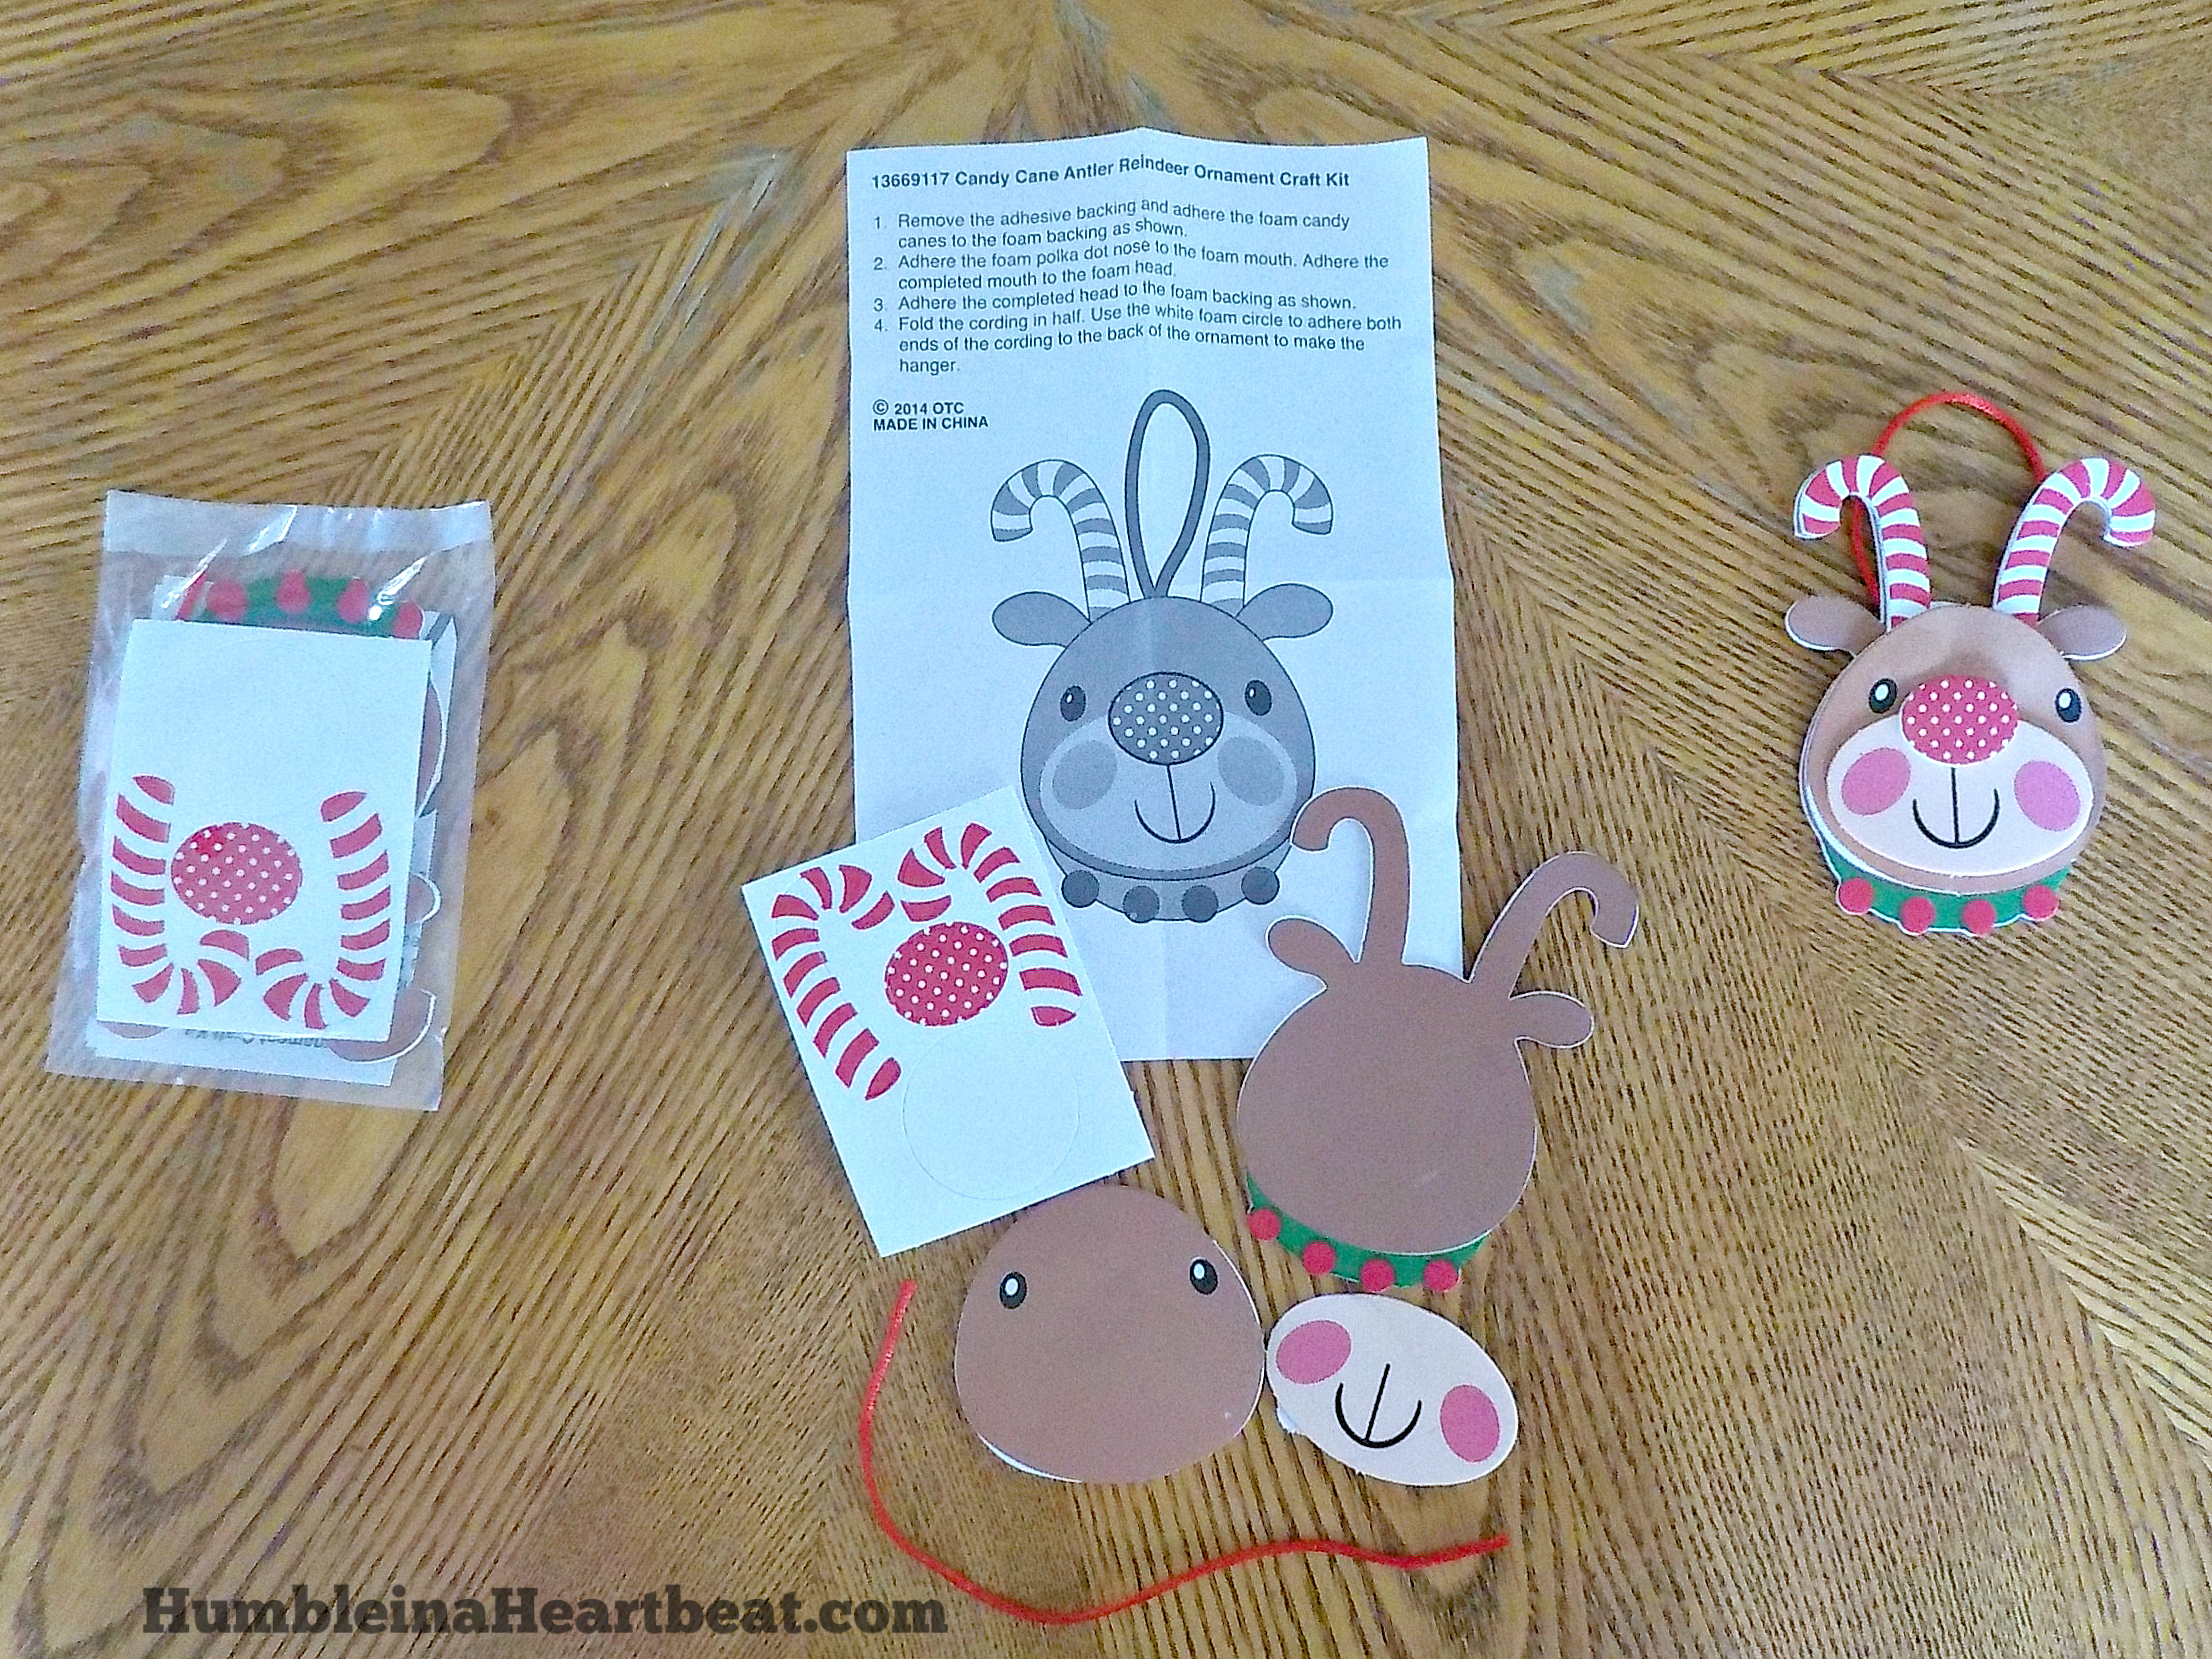 These Christmas ornaments look easy enough to make with my kids! I just love cheap and fun traditions for my family.